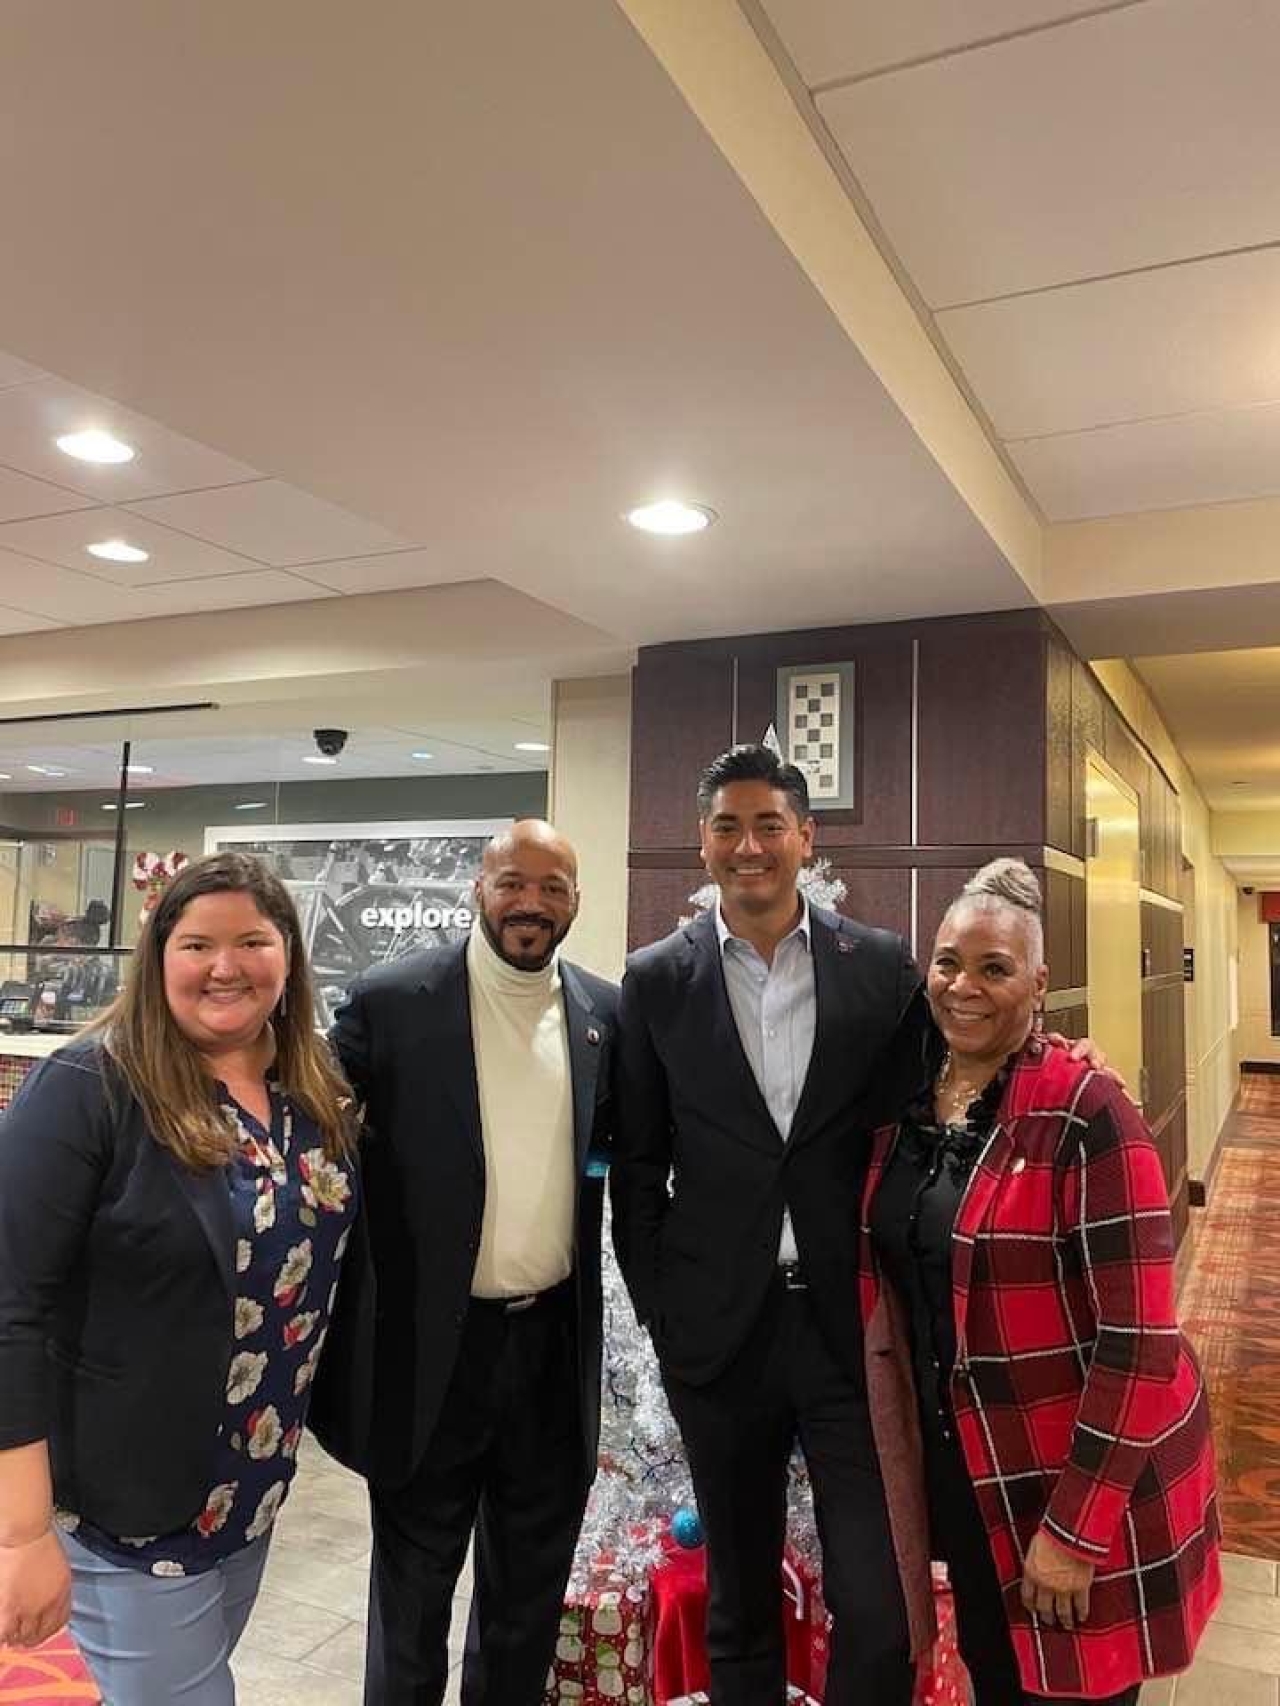 Reps Ingram, Miranda, and West with Mayor Aftab Pureval at Black Politico Event.